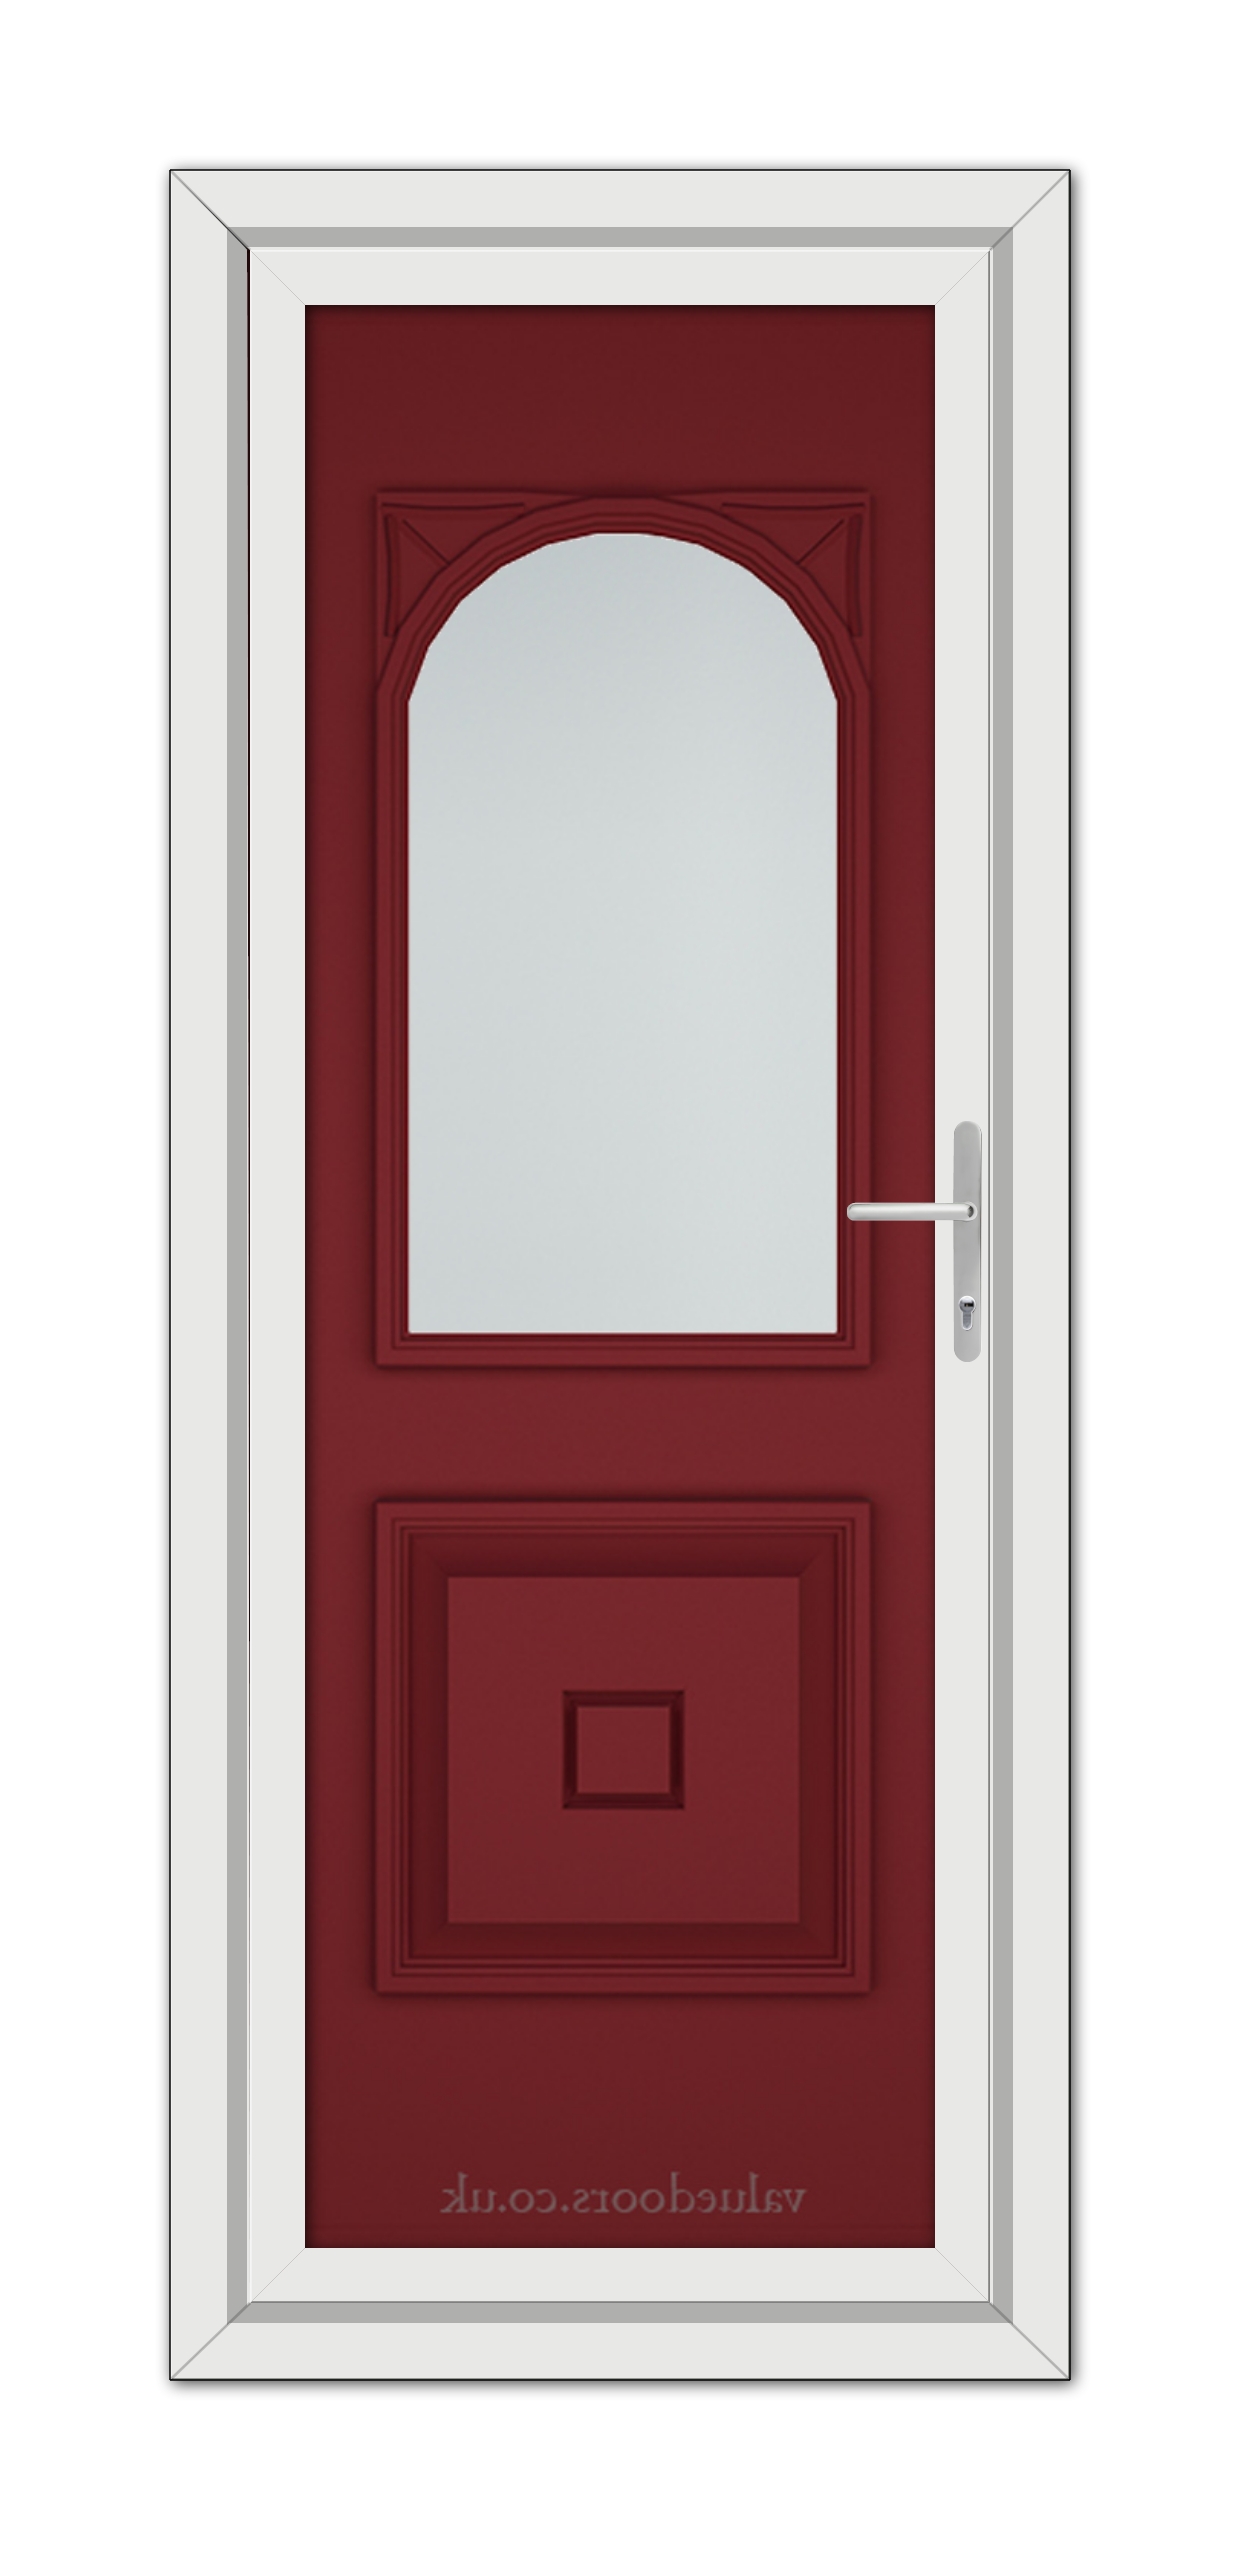 A Red Reims uPVC Door with a vertical window at the top and a metallic handle, set within a white door frame.